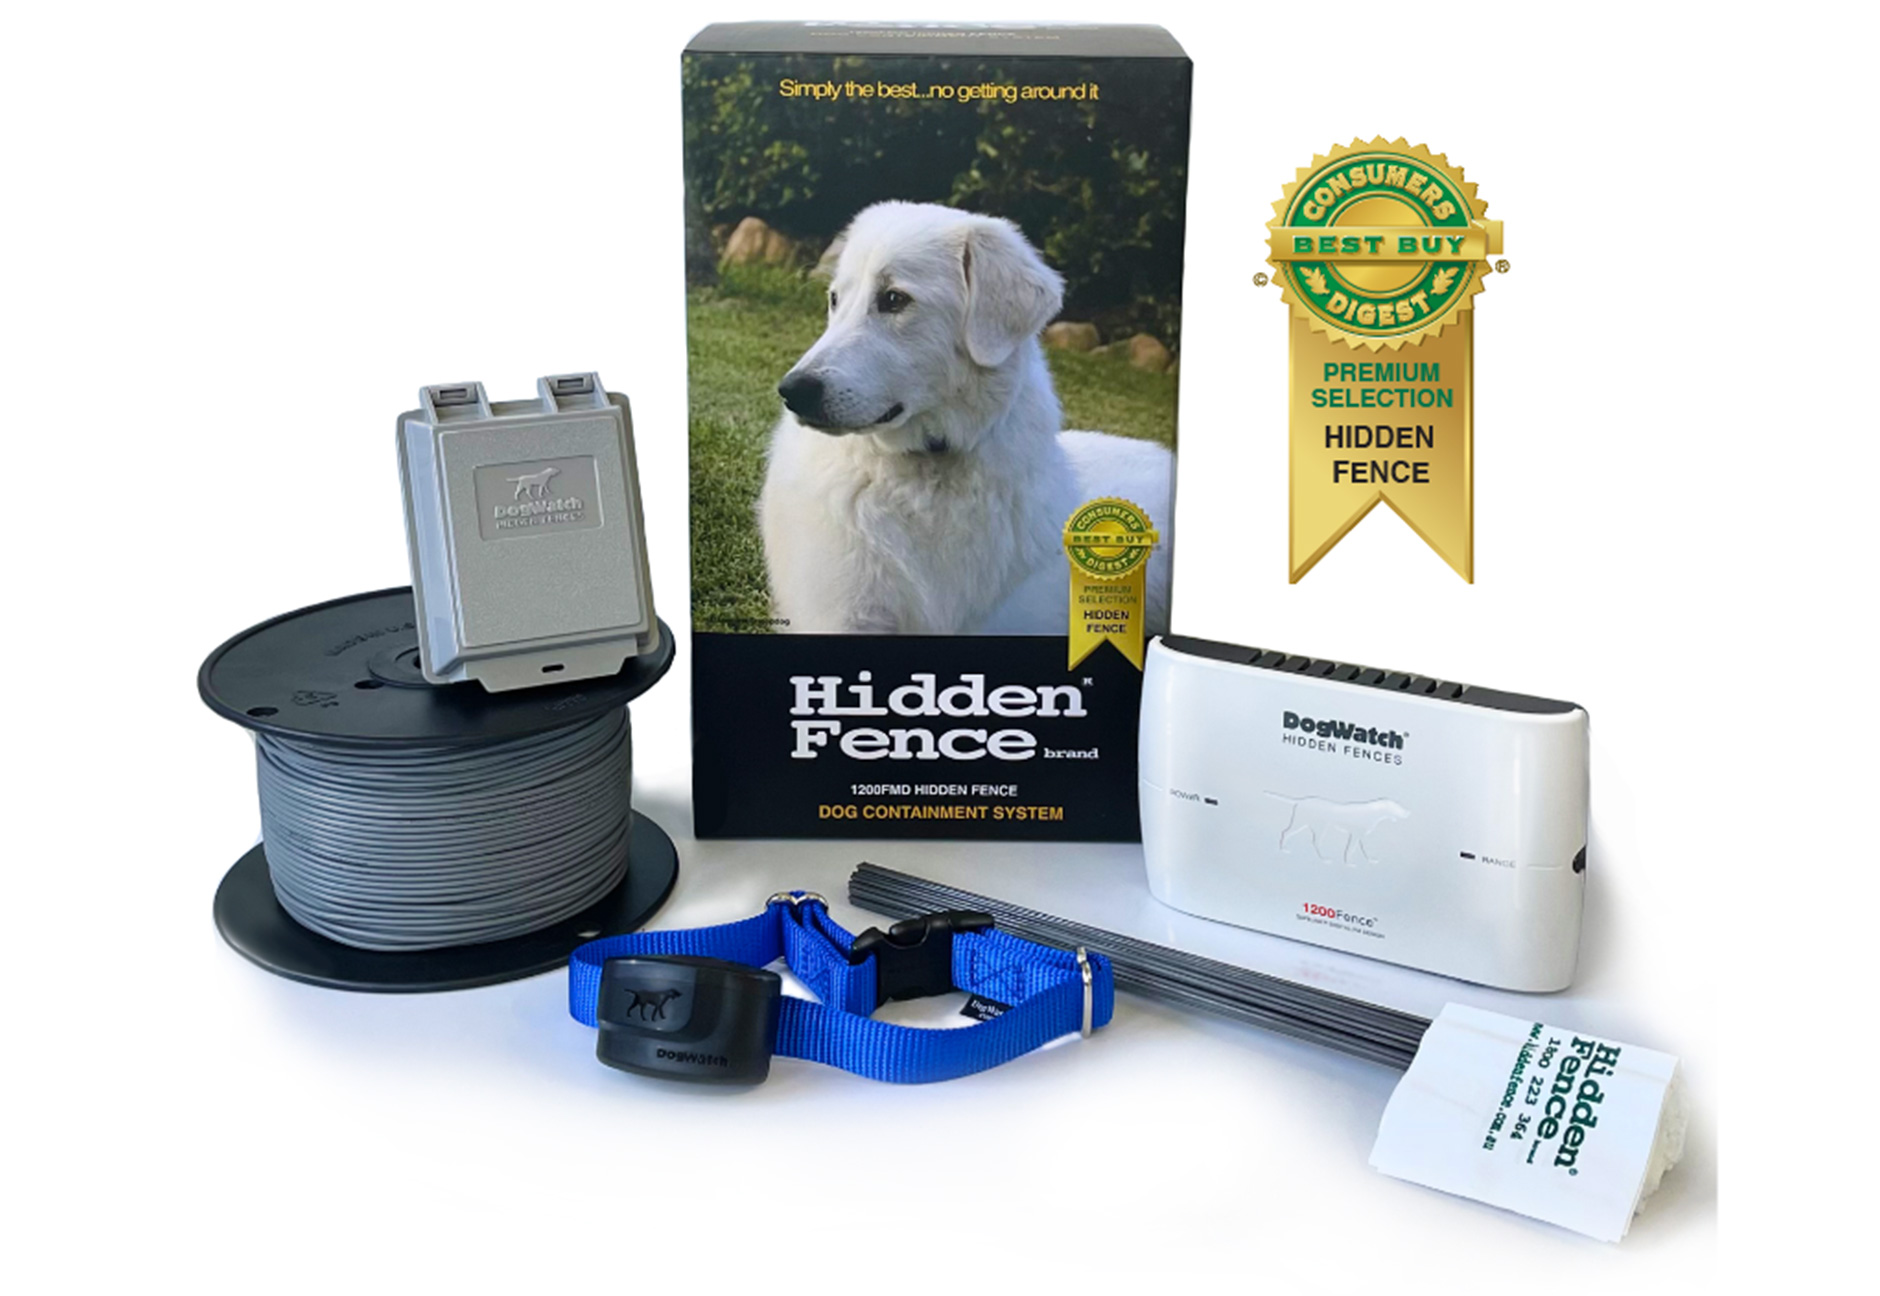 How Does DogWatch® Compare to Invisible Fence®? - DogWatch Hidden